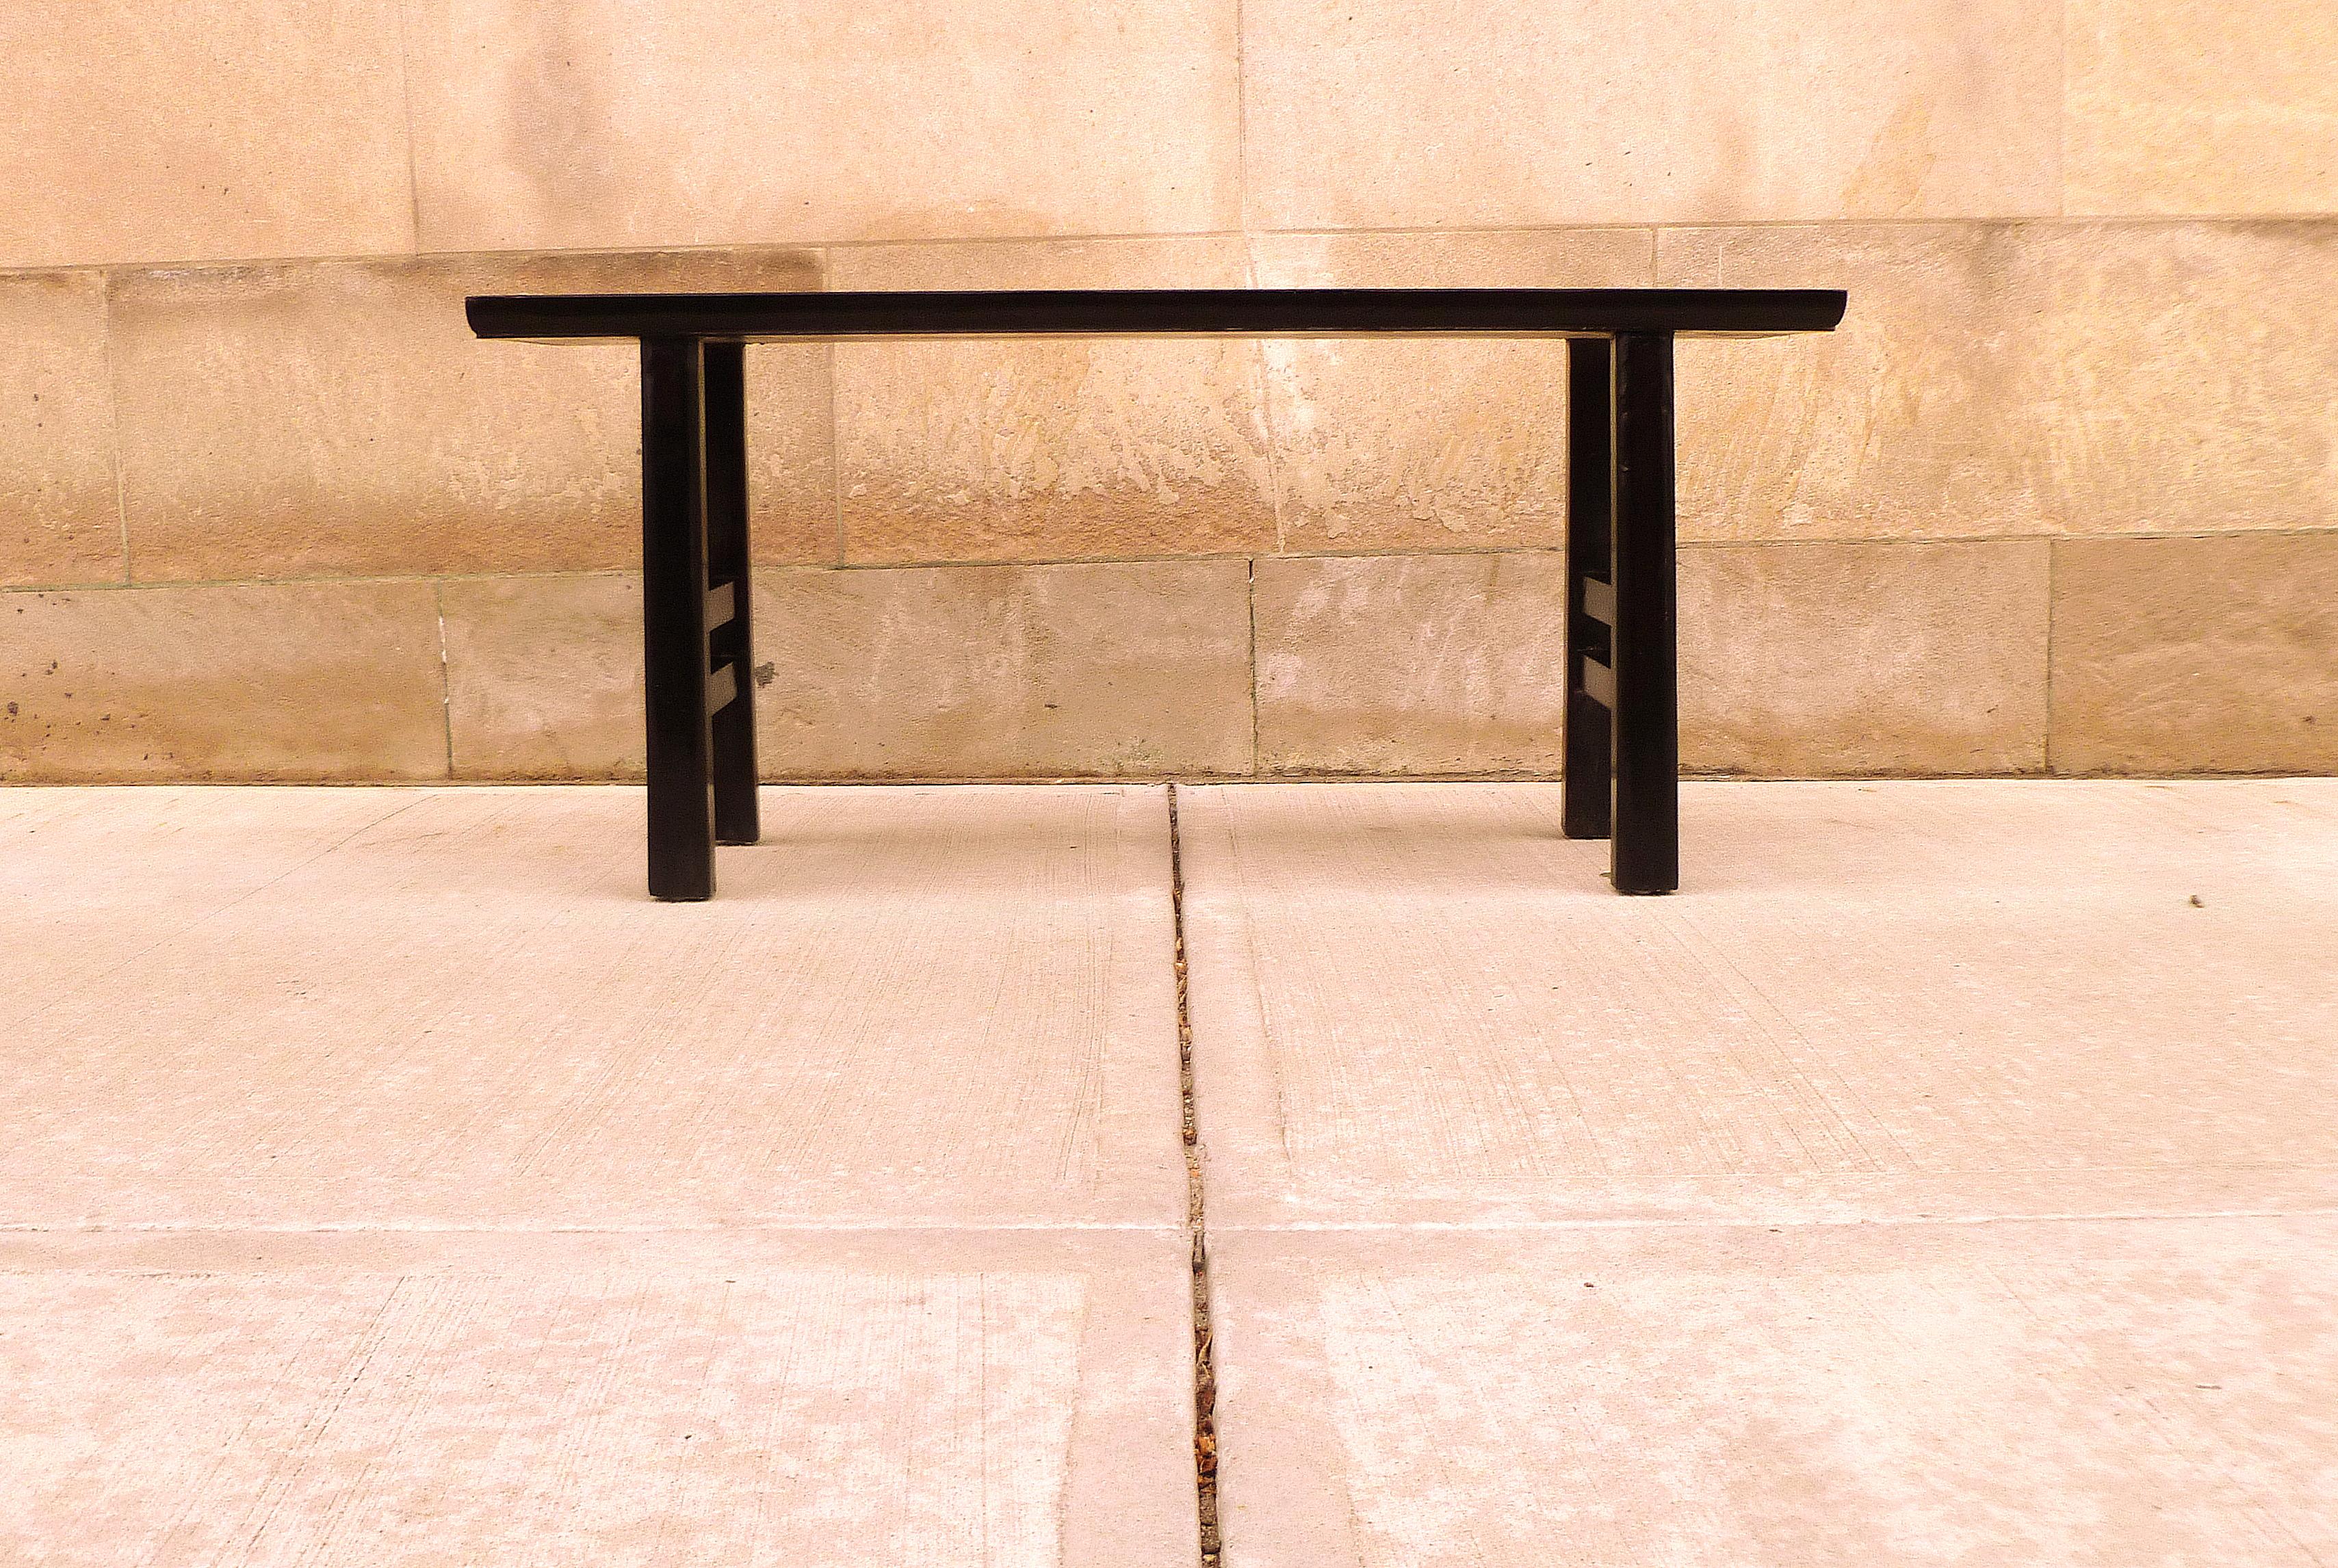 Fine black lacquer bench, simple black lacquer bench with straight legs, elegant color and lines. 
We carry fine quality furniture with elegant finished and has been appeared many times in 